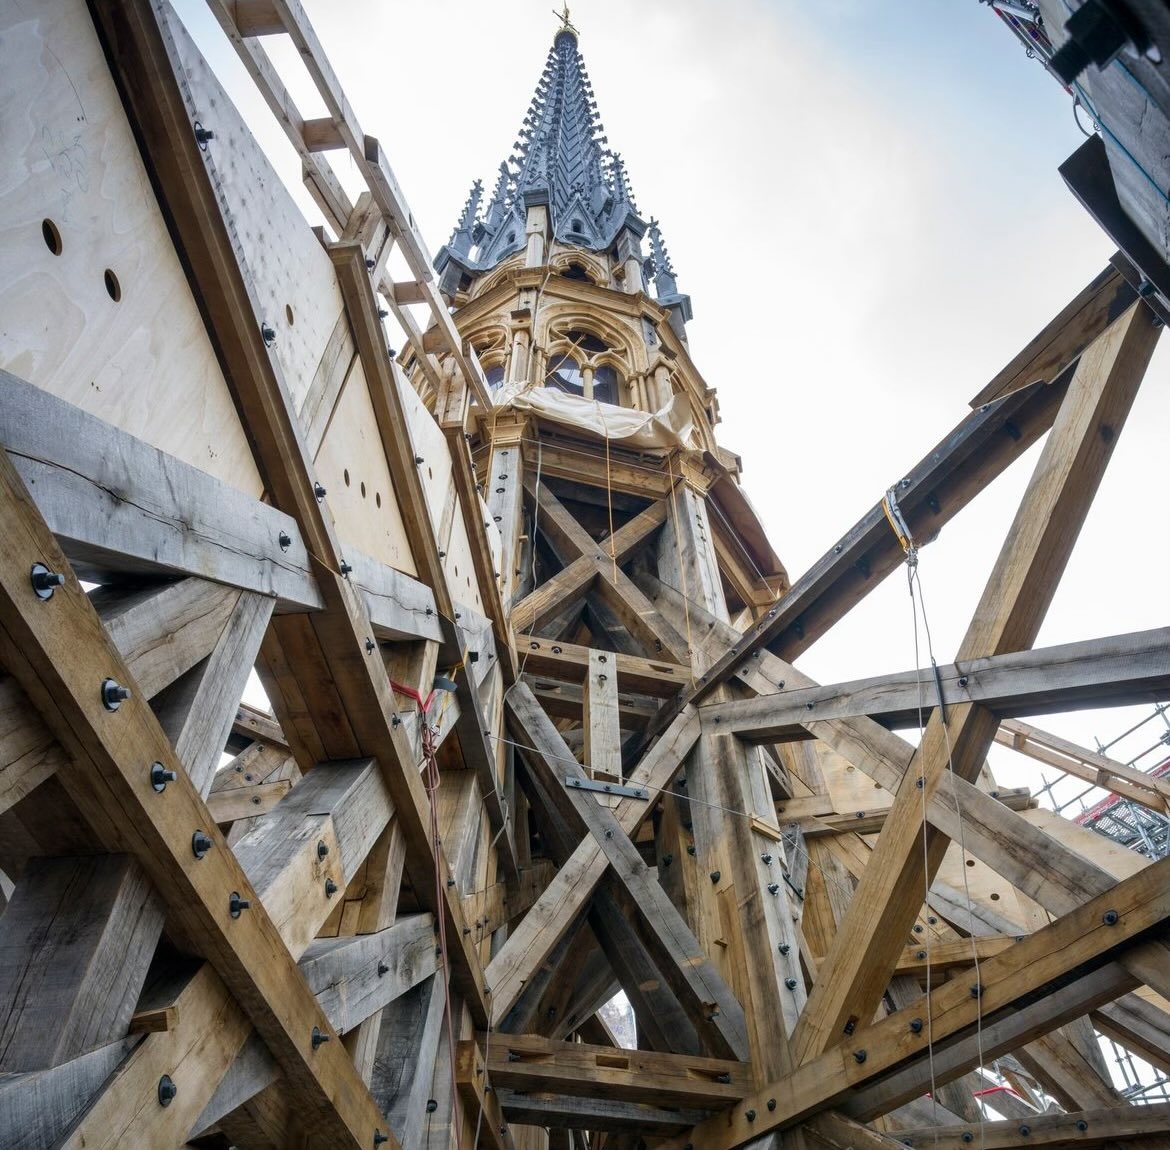 Today is the 5th anniversary of the fire at Notre-Dame. In 8 months the cathedral will open its gates to everyone. Today we can clearly see the new spire while the scaffolding is coming down. Don’t forget to look up if you pass by as the amazing woodwork will soon be covered!